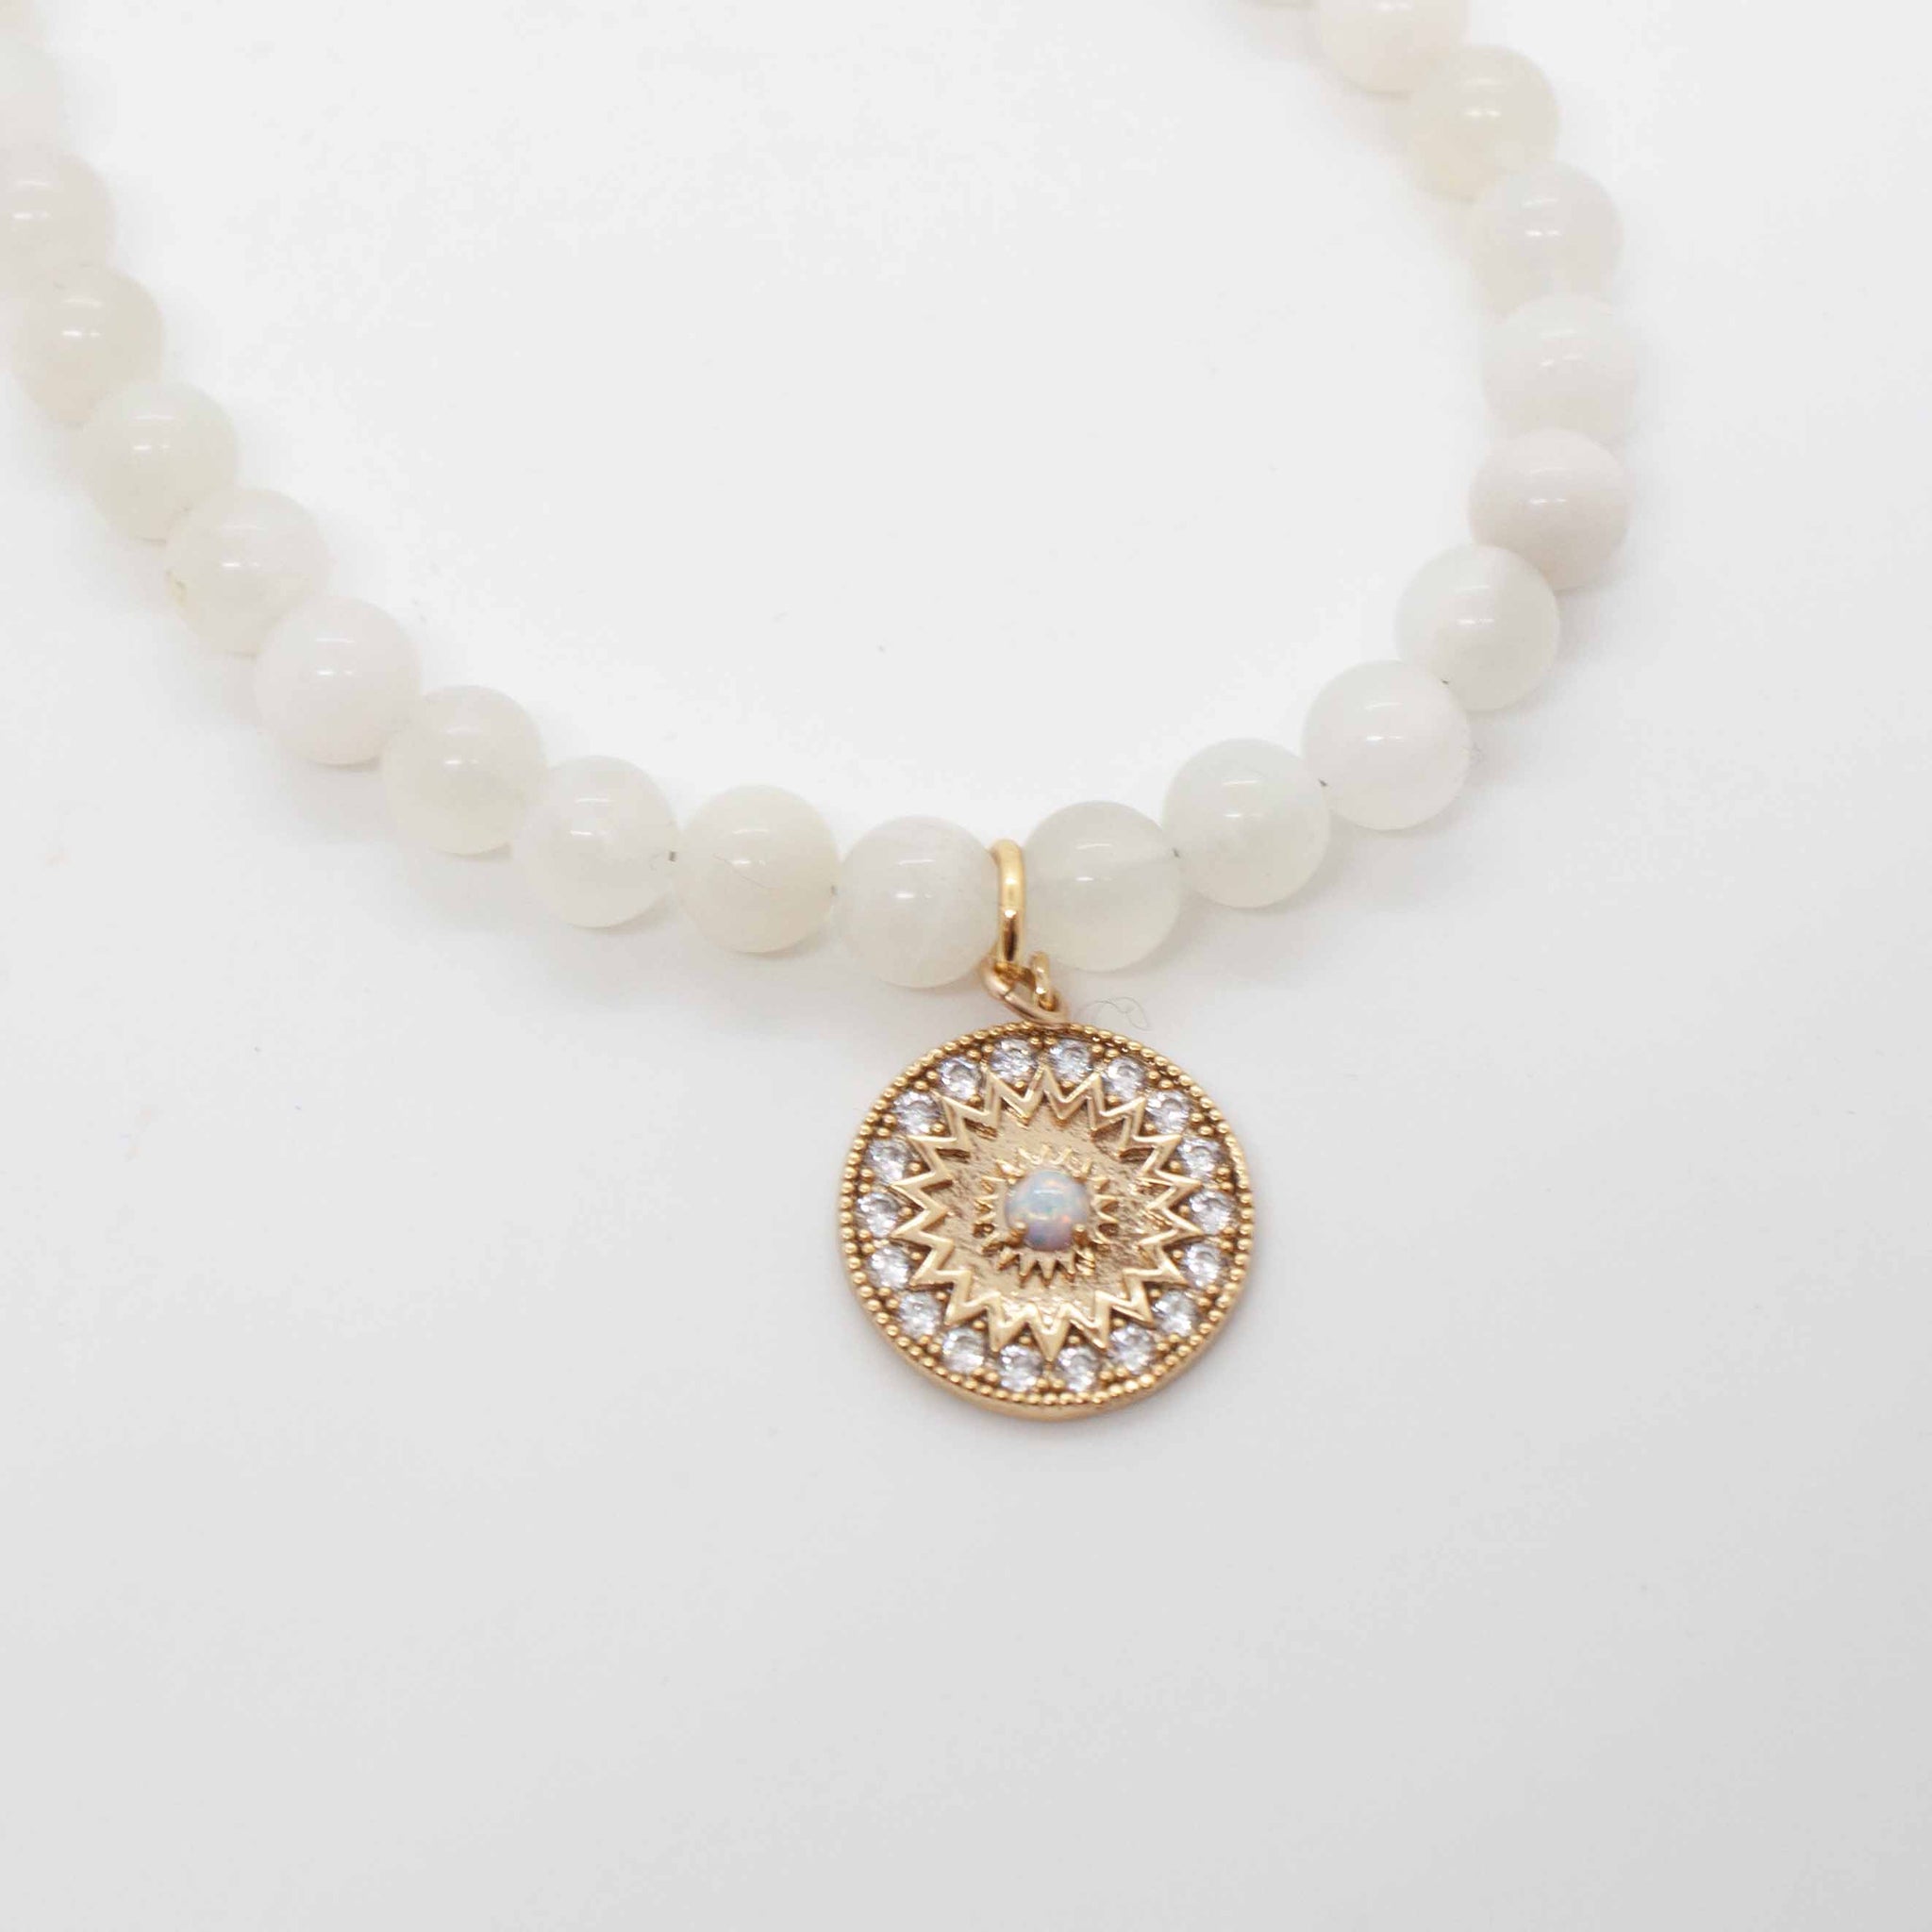 16 inch white moonstone necklace with golden Paige pendant and filigree snap clasp.